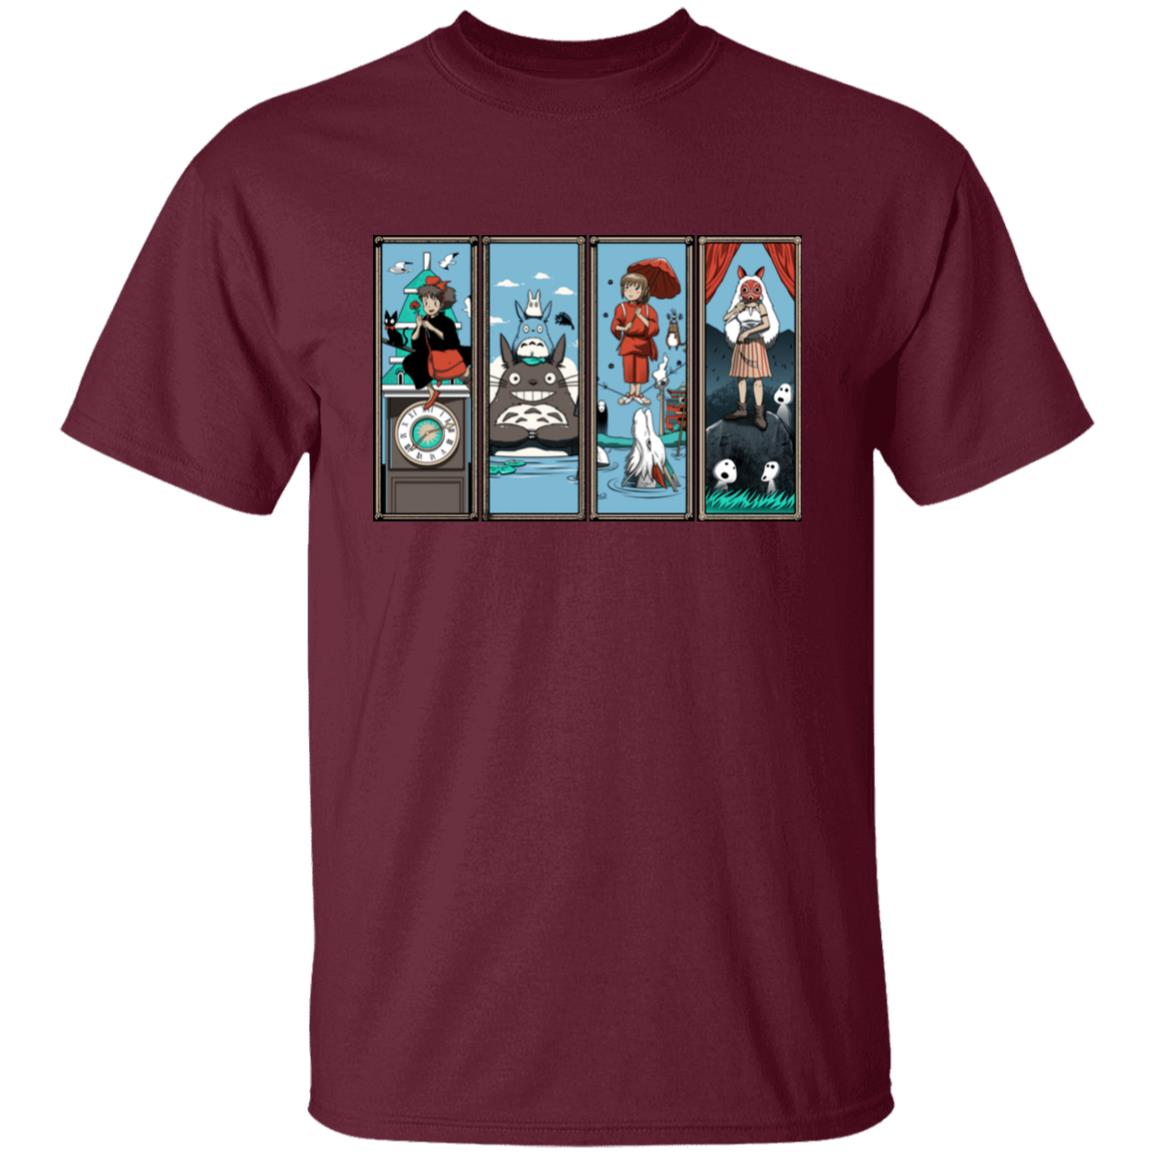 Ghibli Most Famous Movies Collection T Shirt